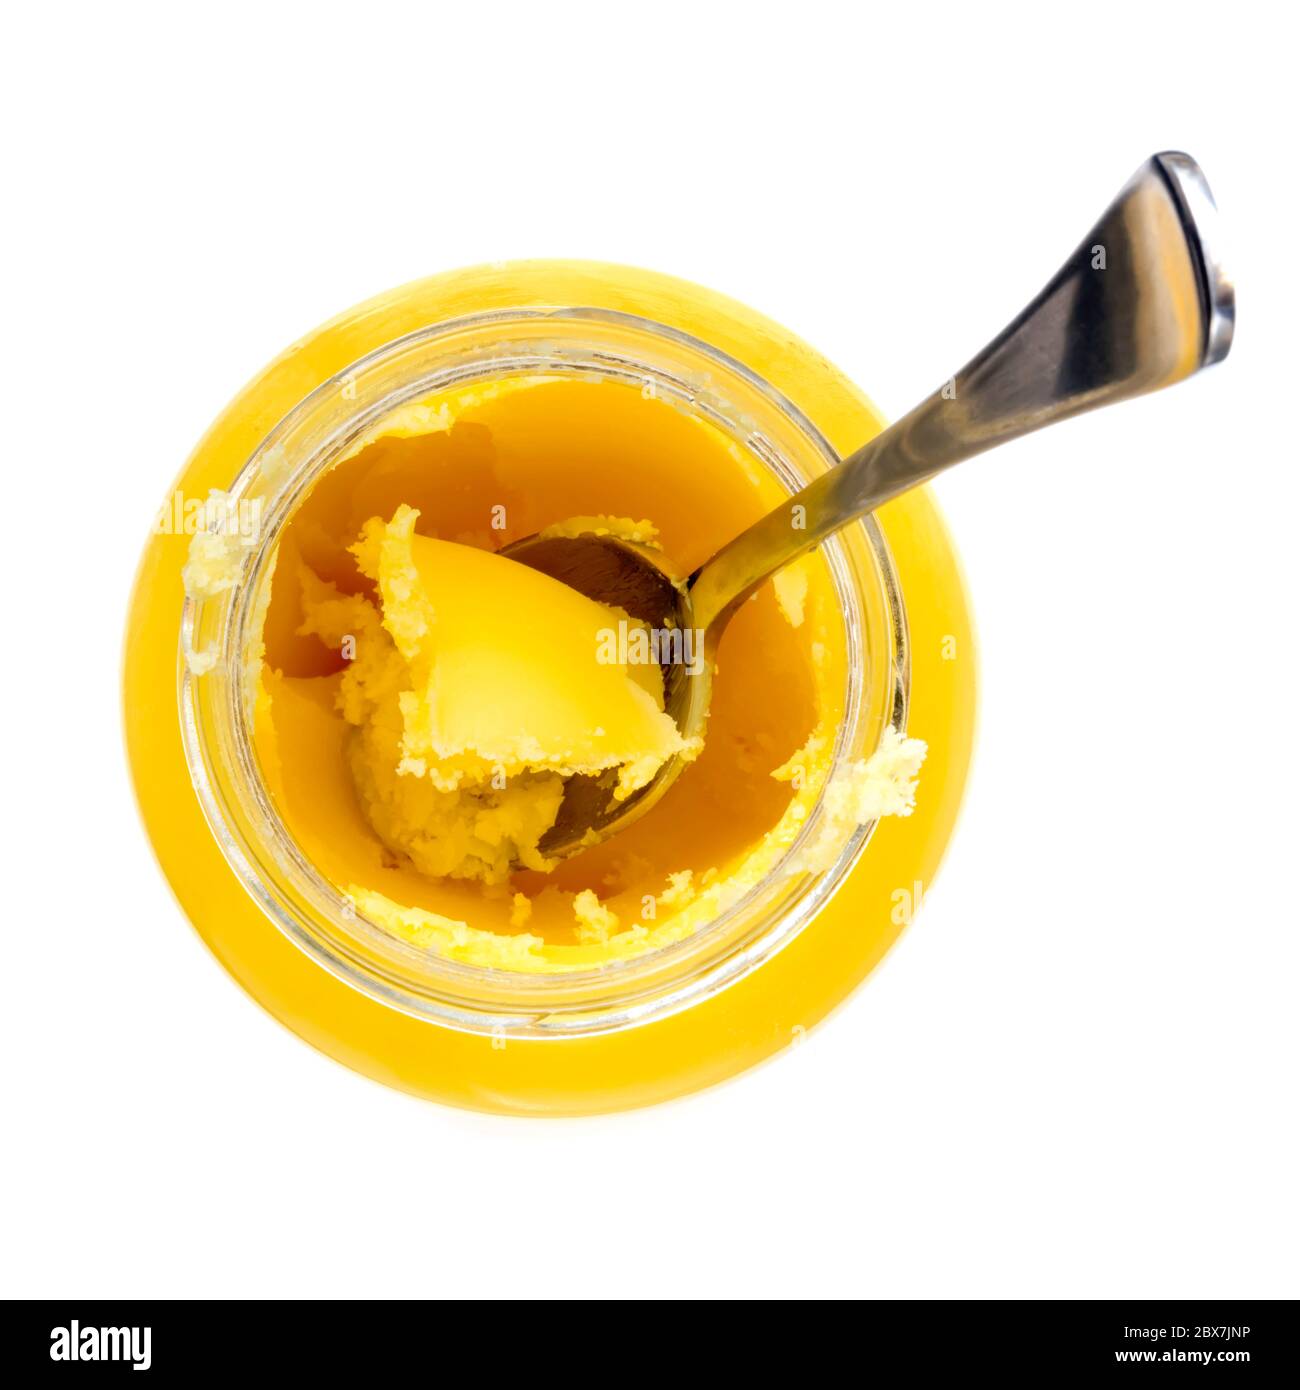 Ghee in jar with spool.  Top view, isolated on white.  Clarified butter from grass-fed cows. Stock Photo